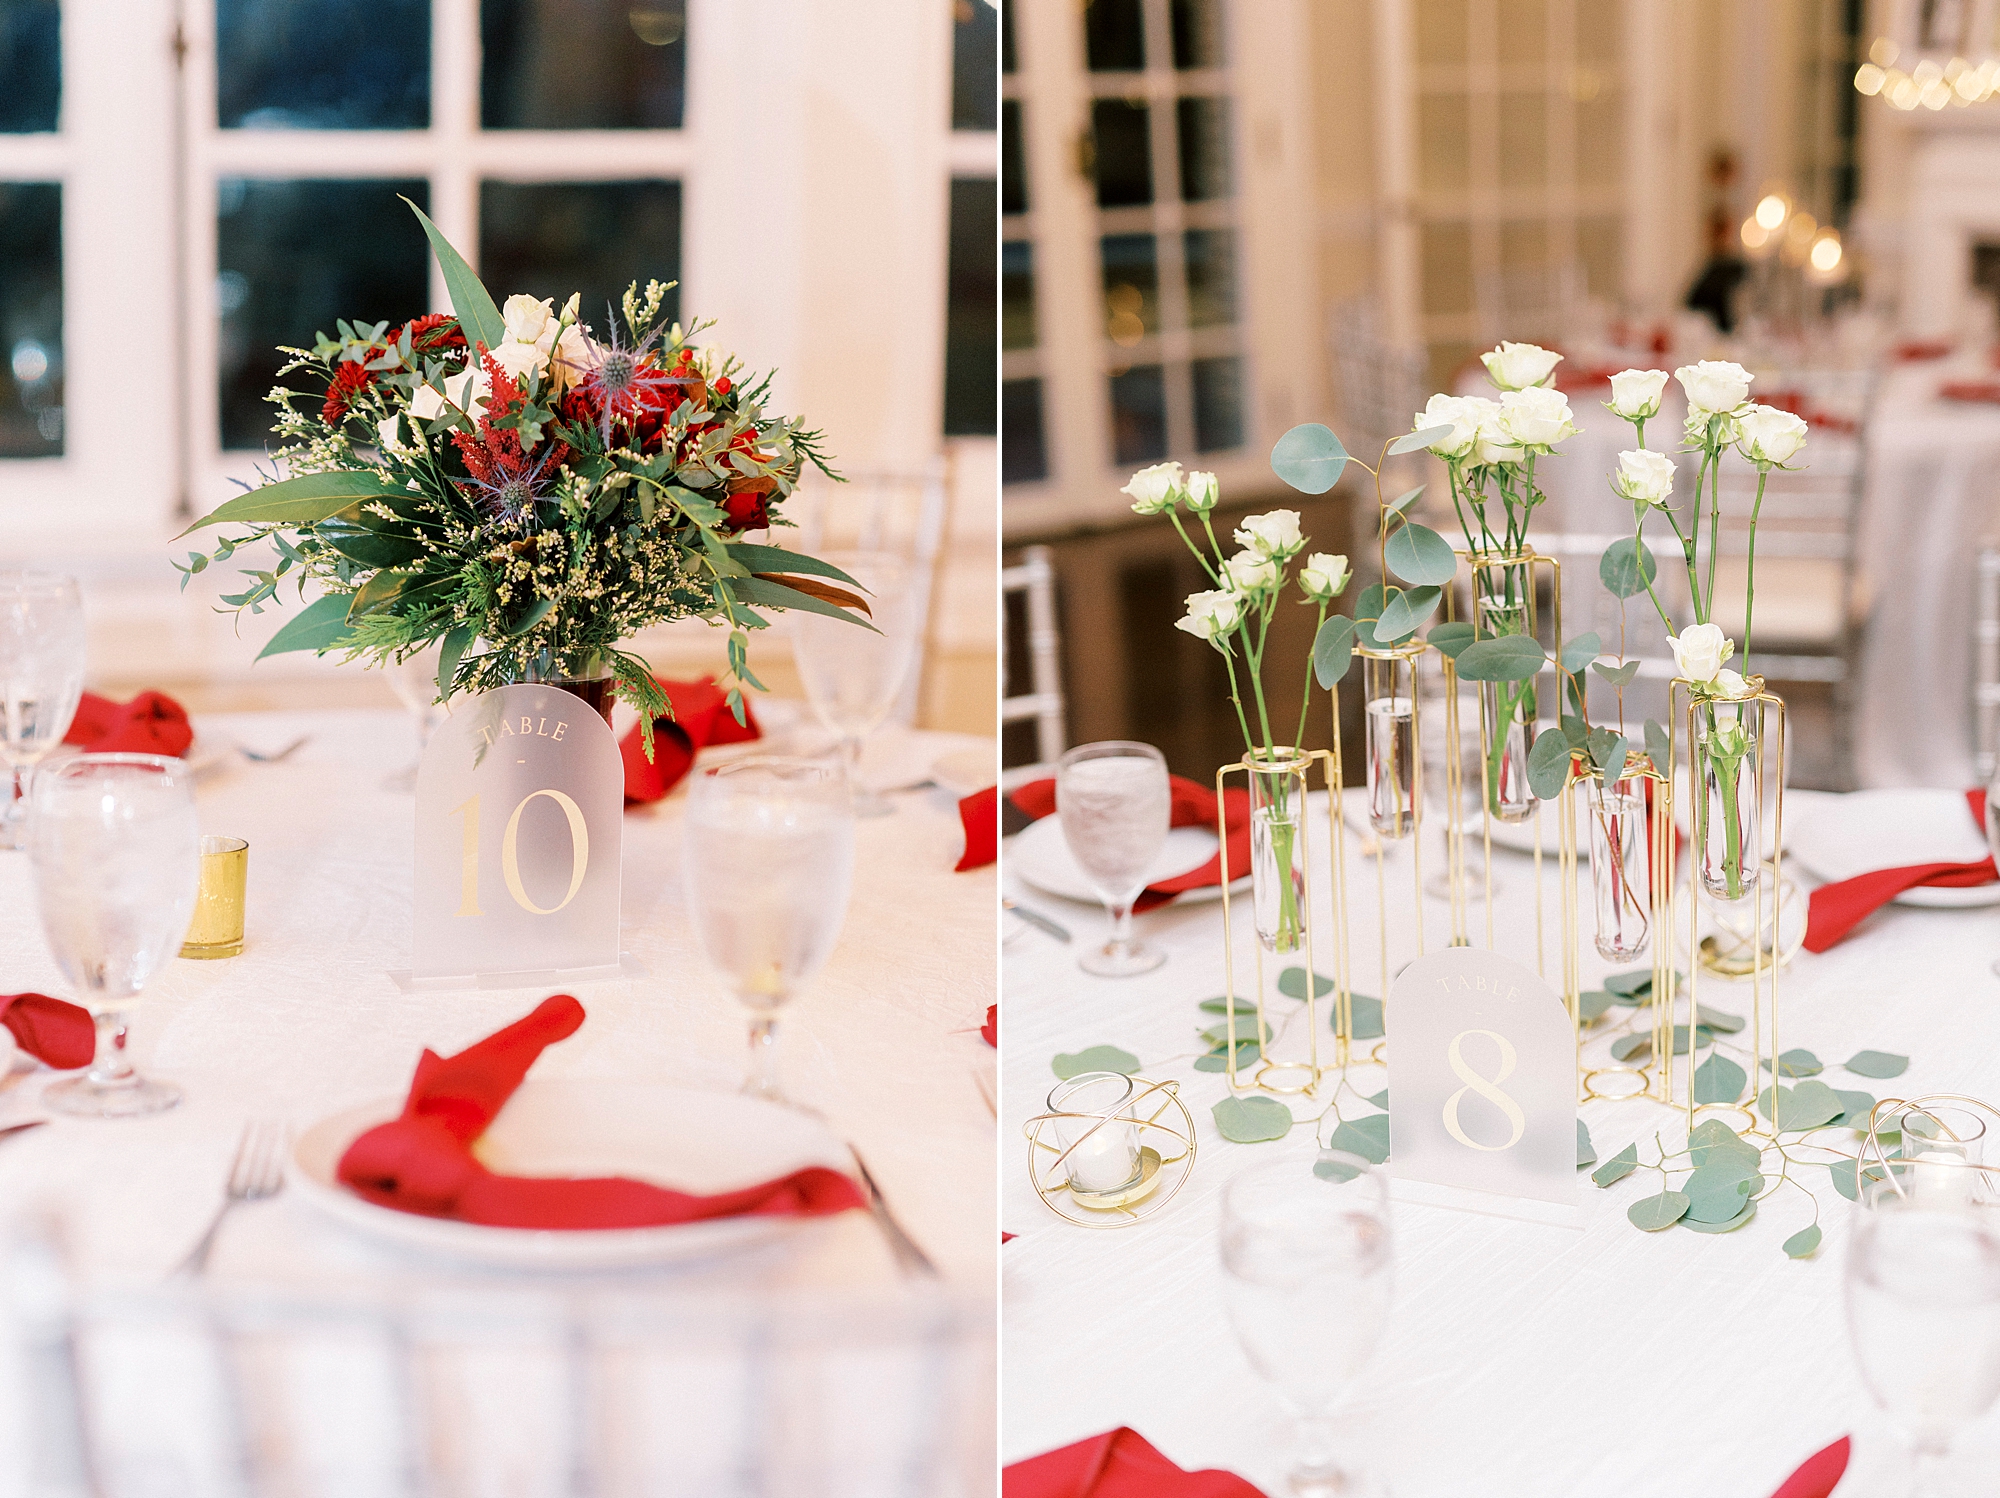 red napkins, white table cloth, and red and white floral arrangements for wedding reception inside Separk Mansion